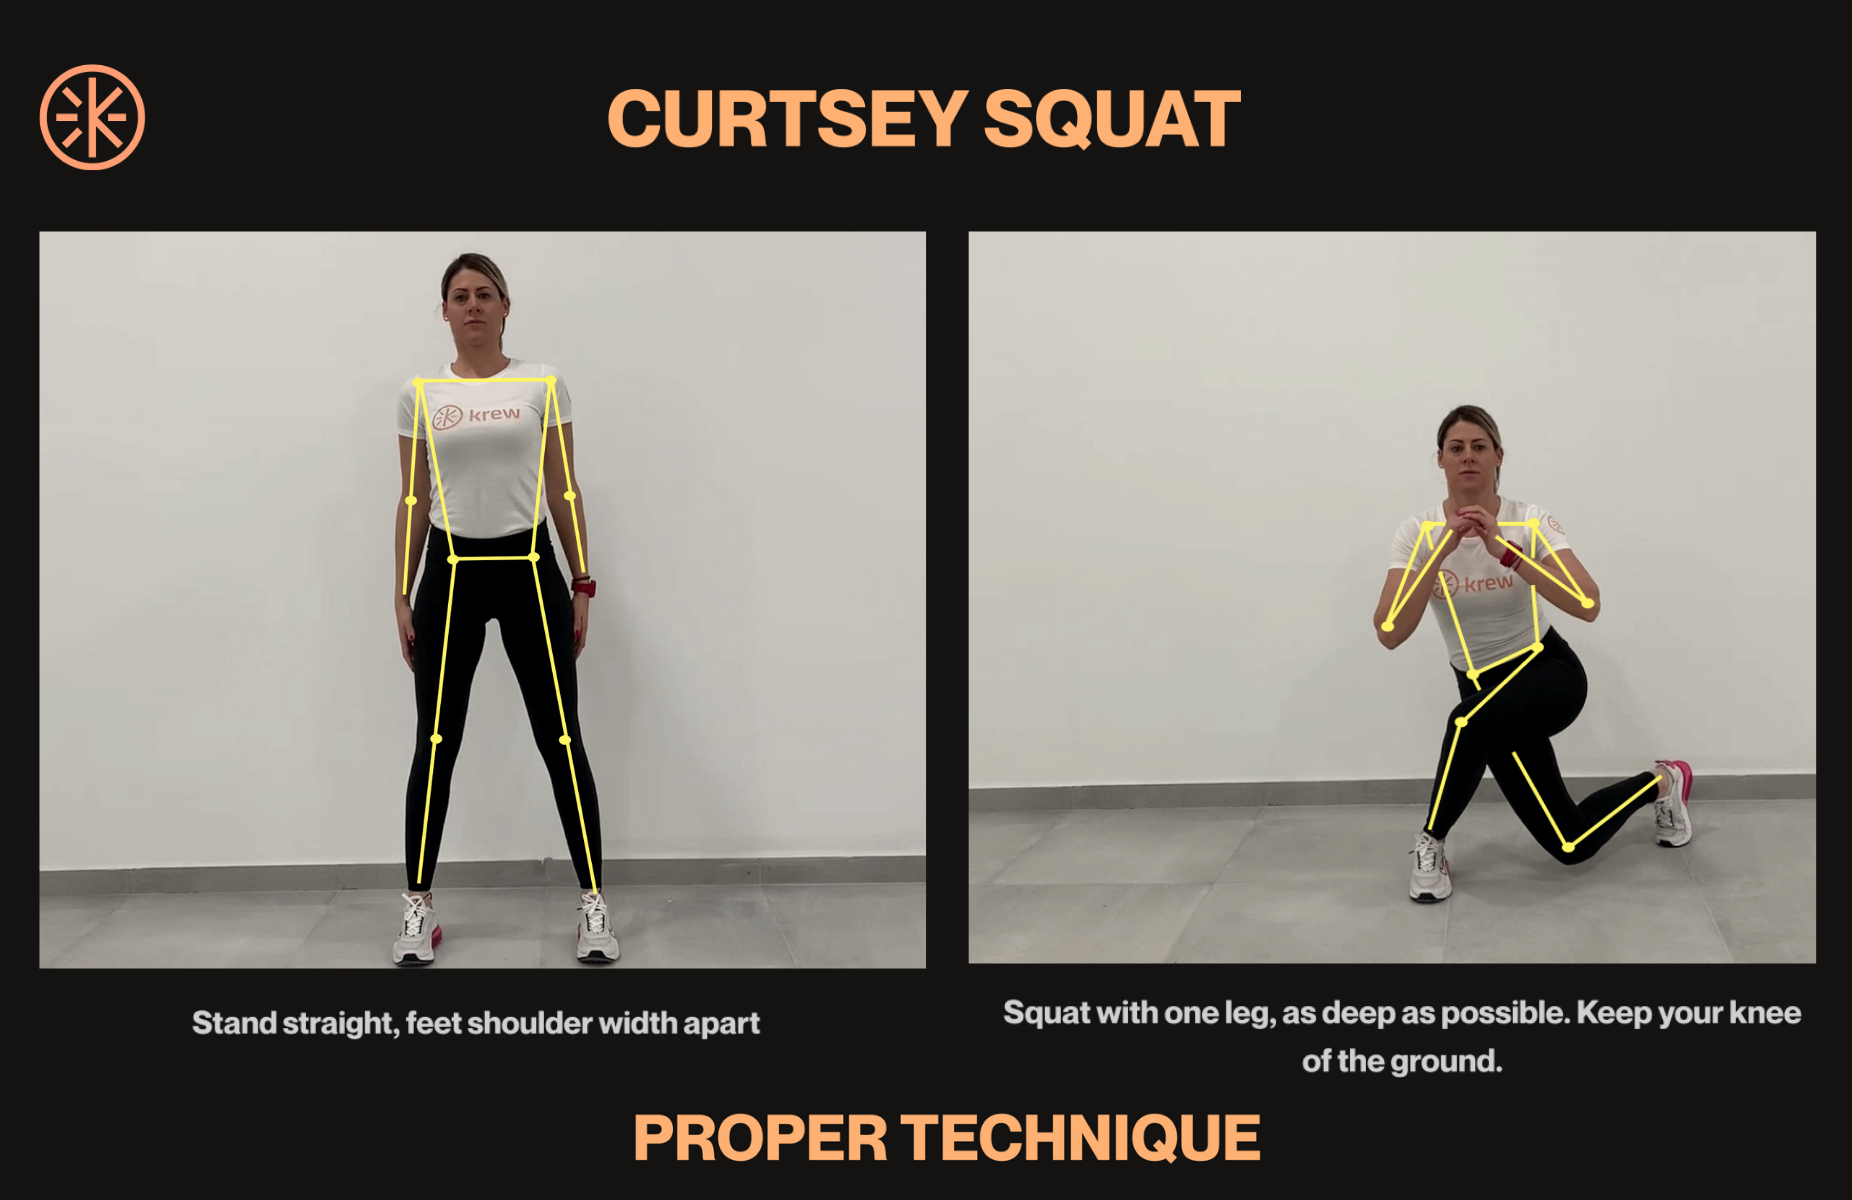 Three squat variations you can do at home